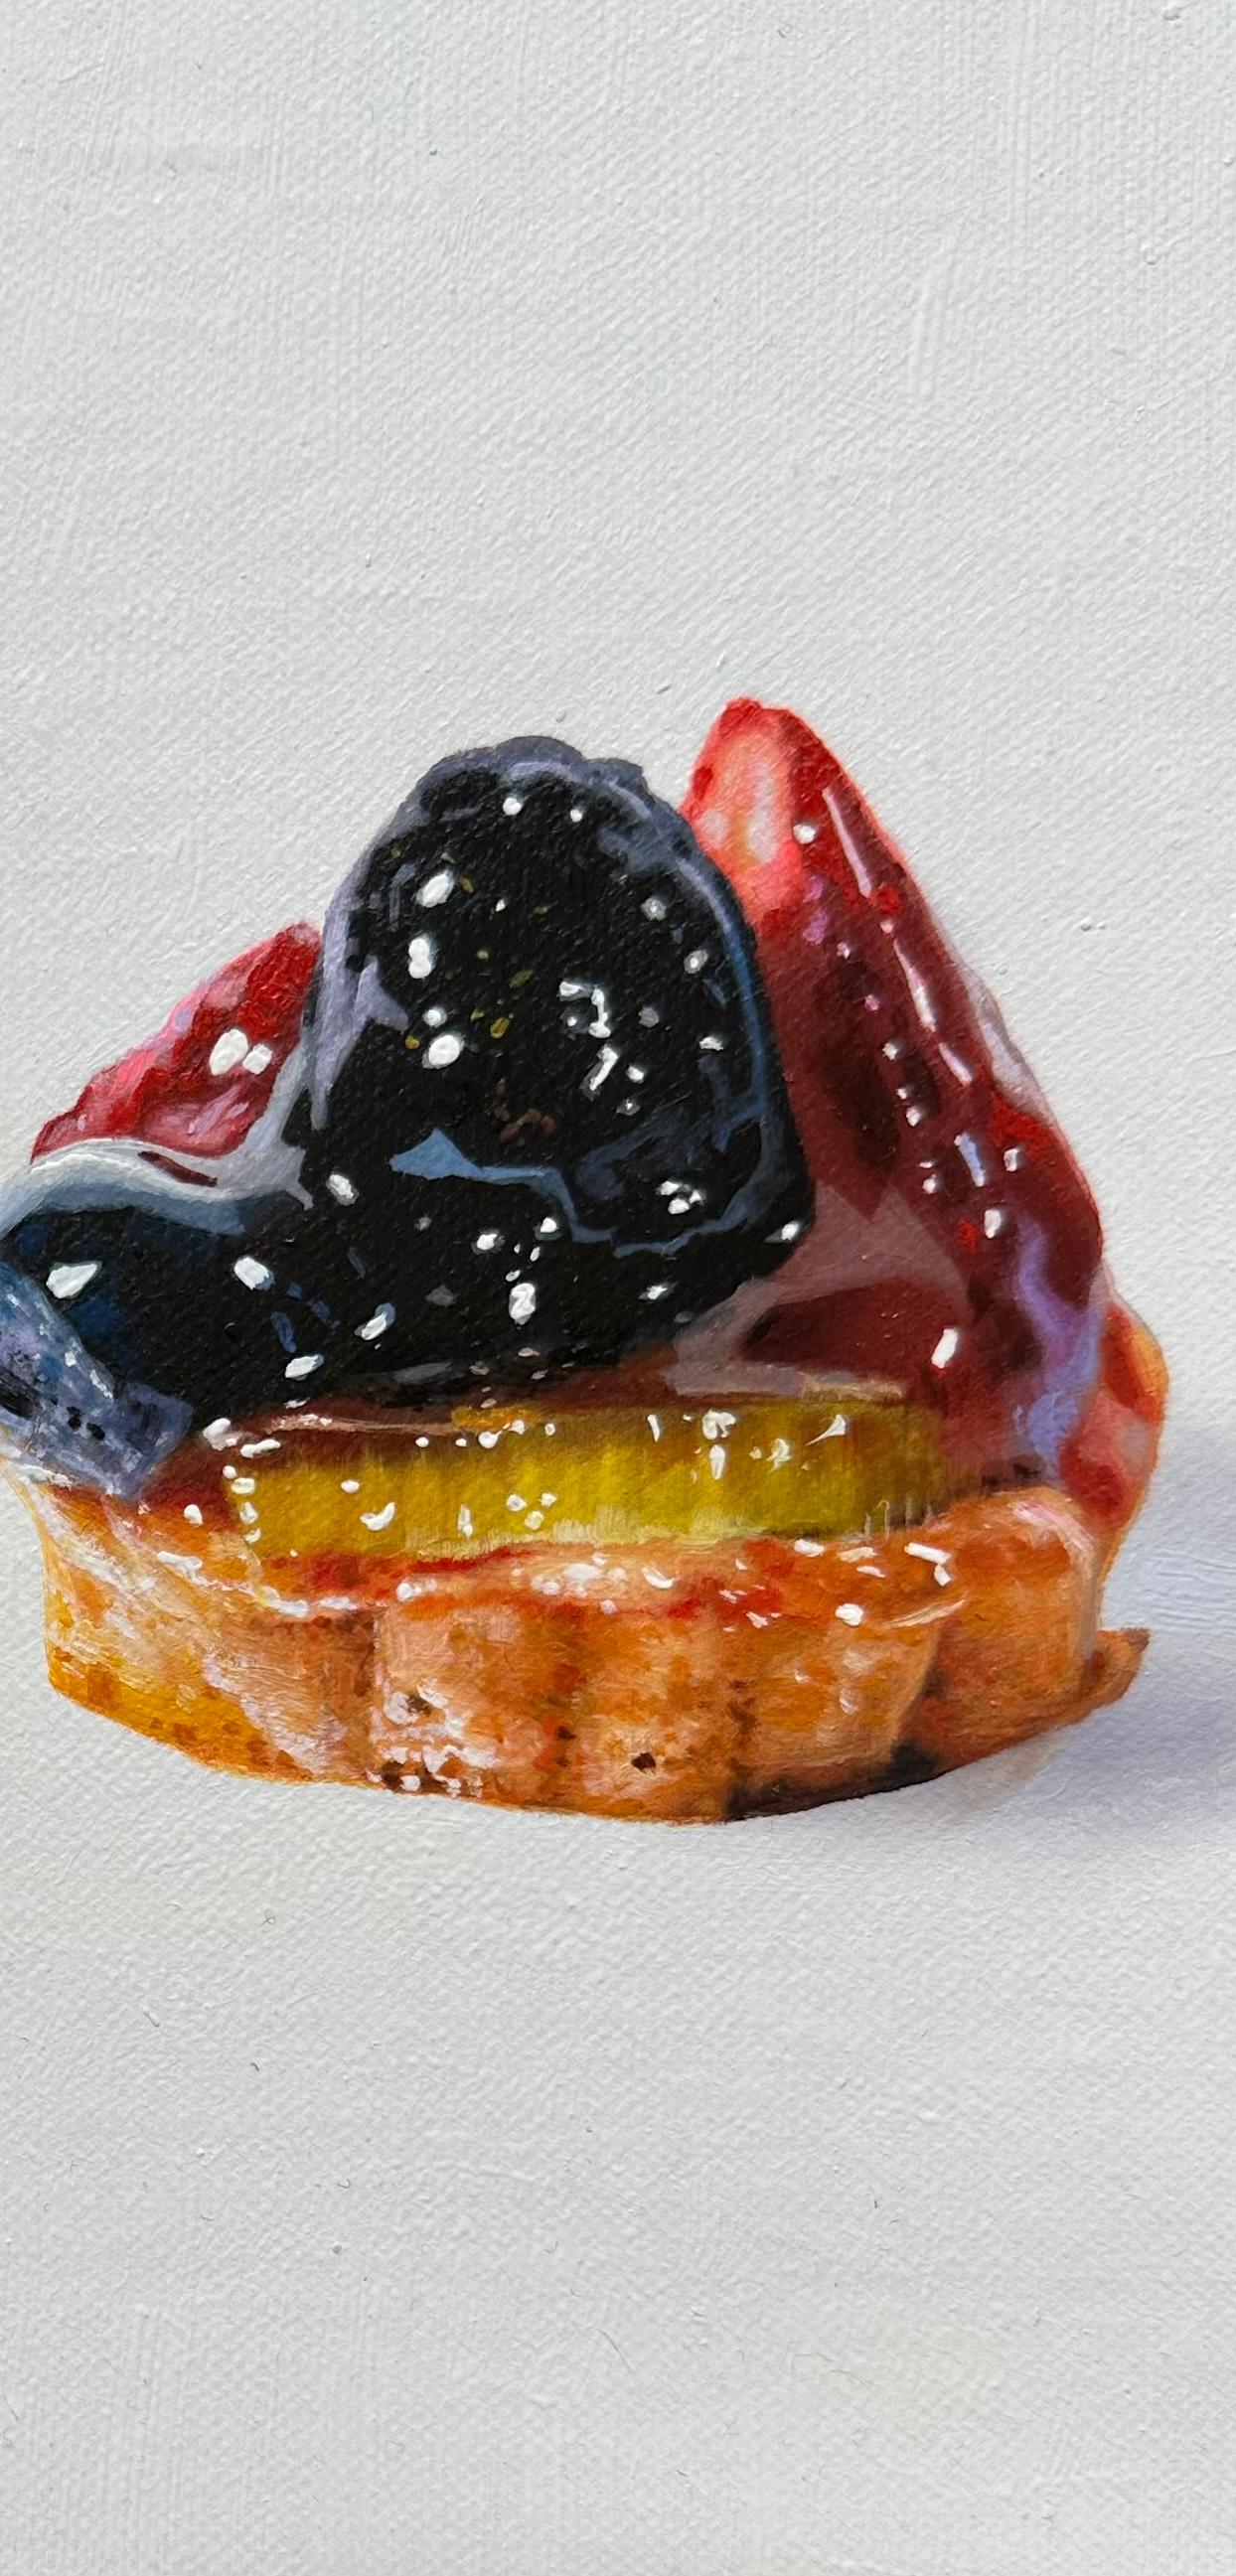 Two Fruit Tarts with a Single Hair - Photorealist Painting by Marc Dennis